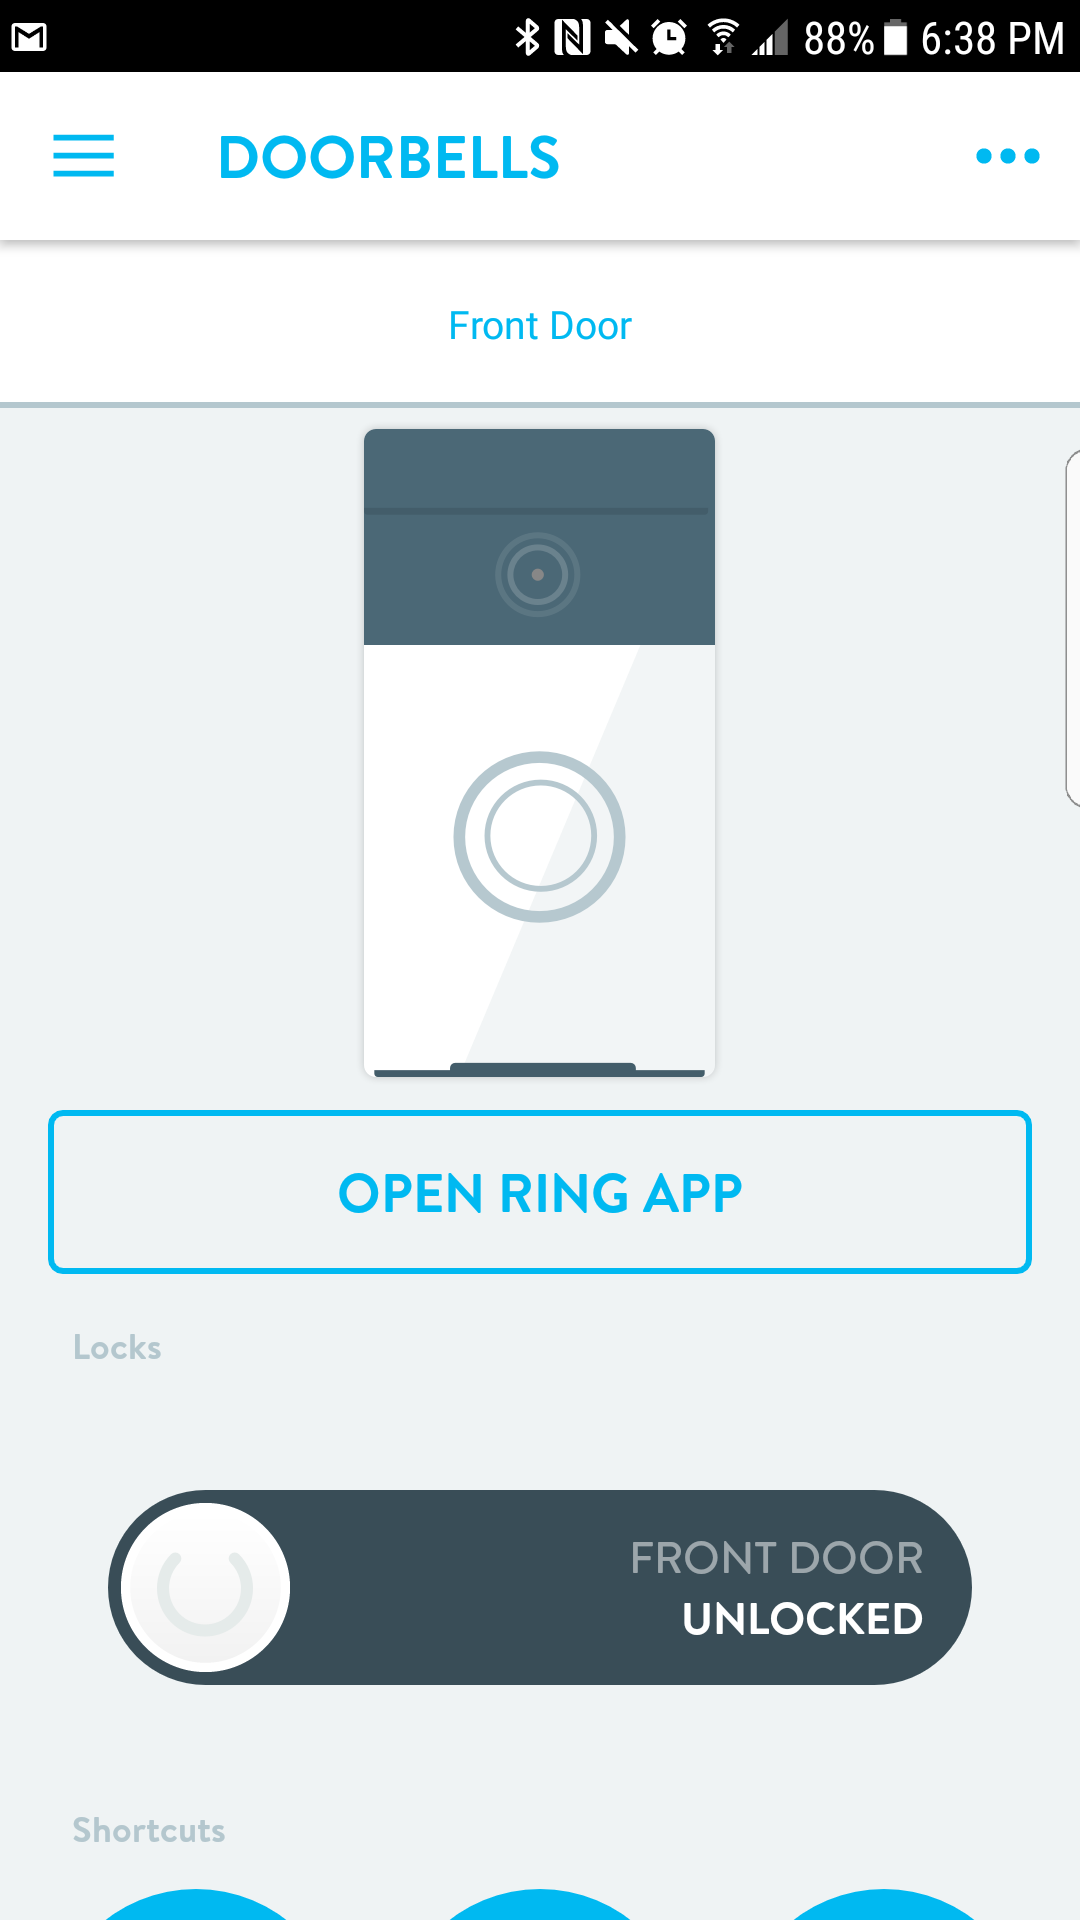 Ring Video Doorbell connected to Wink hub 2.